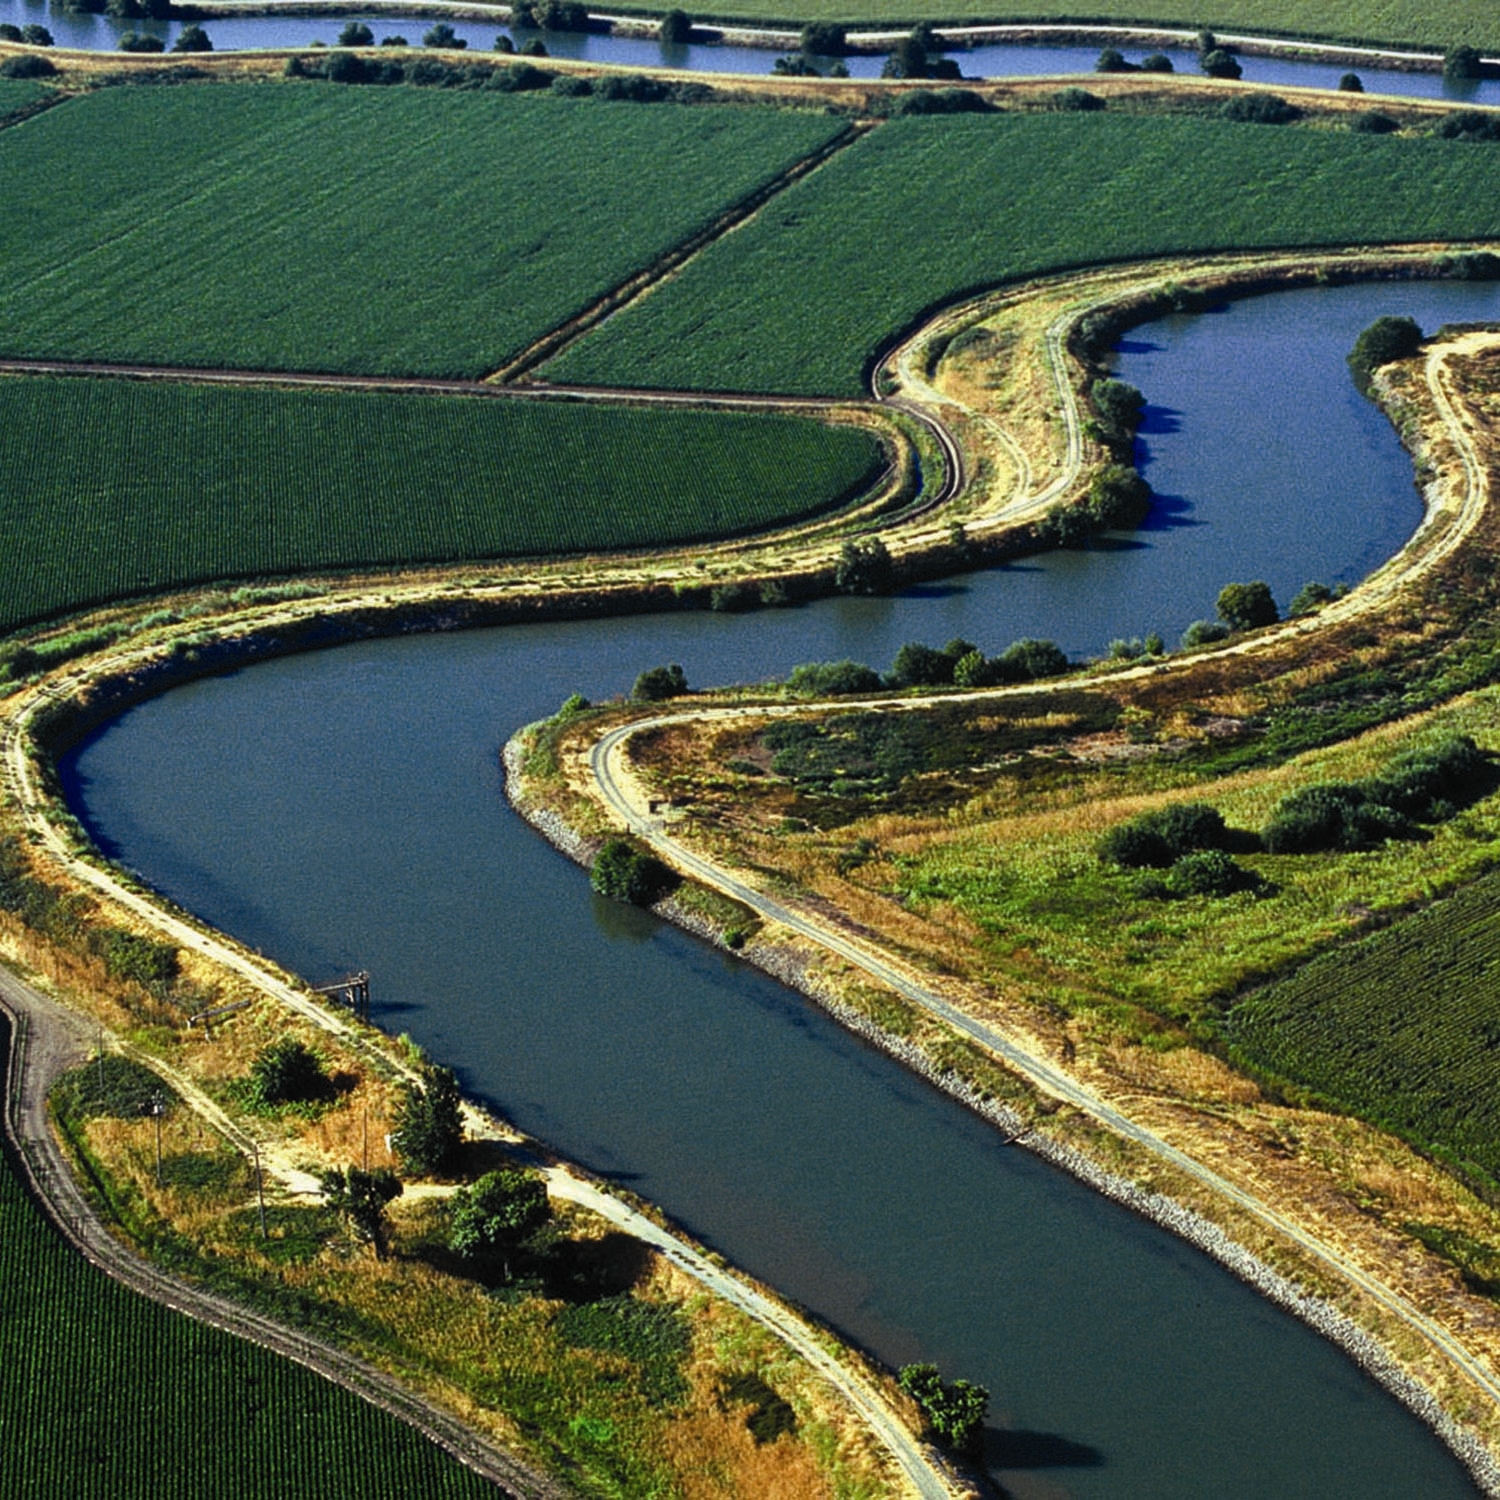 Bird's eye view of Delta farmlands and canal